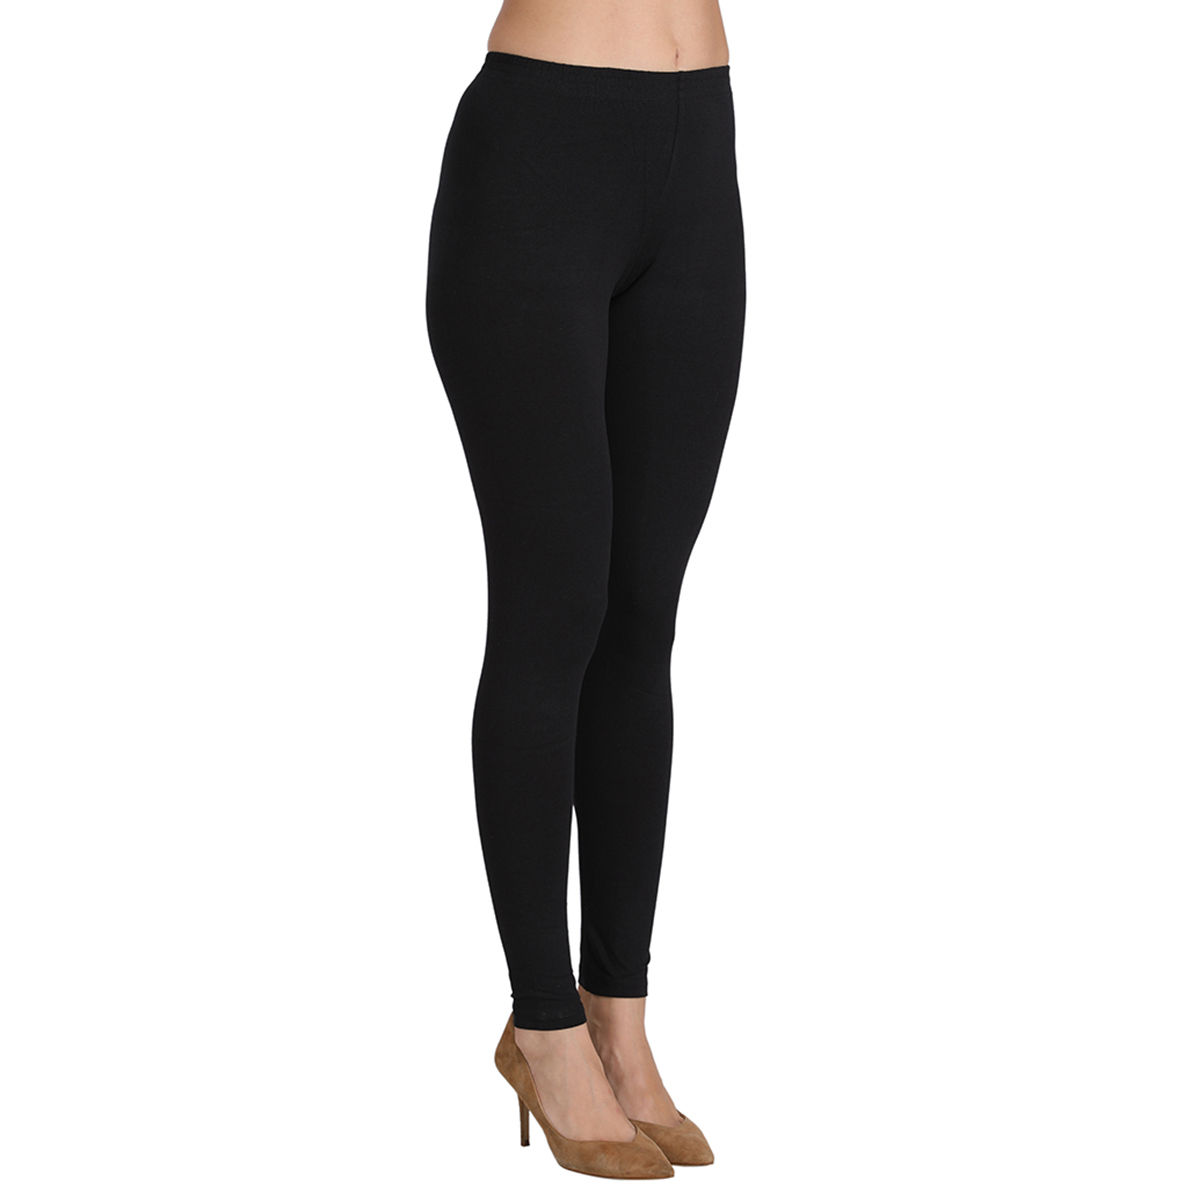 Buy CARBON BASICS Women's Cotton Ankle Leggings Elasticated Waistband Slim  Fit Comfortable & Stretchable Black S at Amazon.in